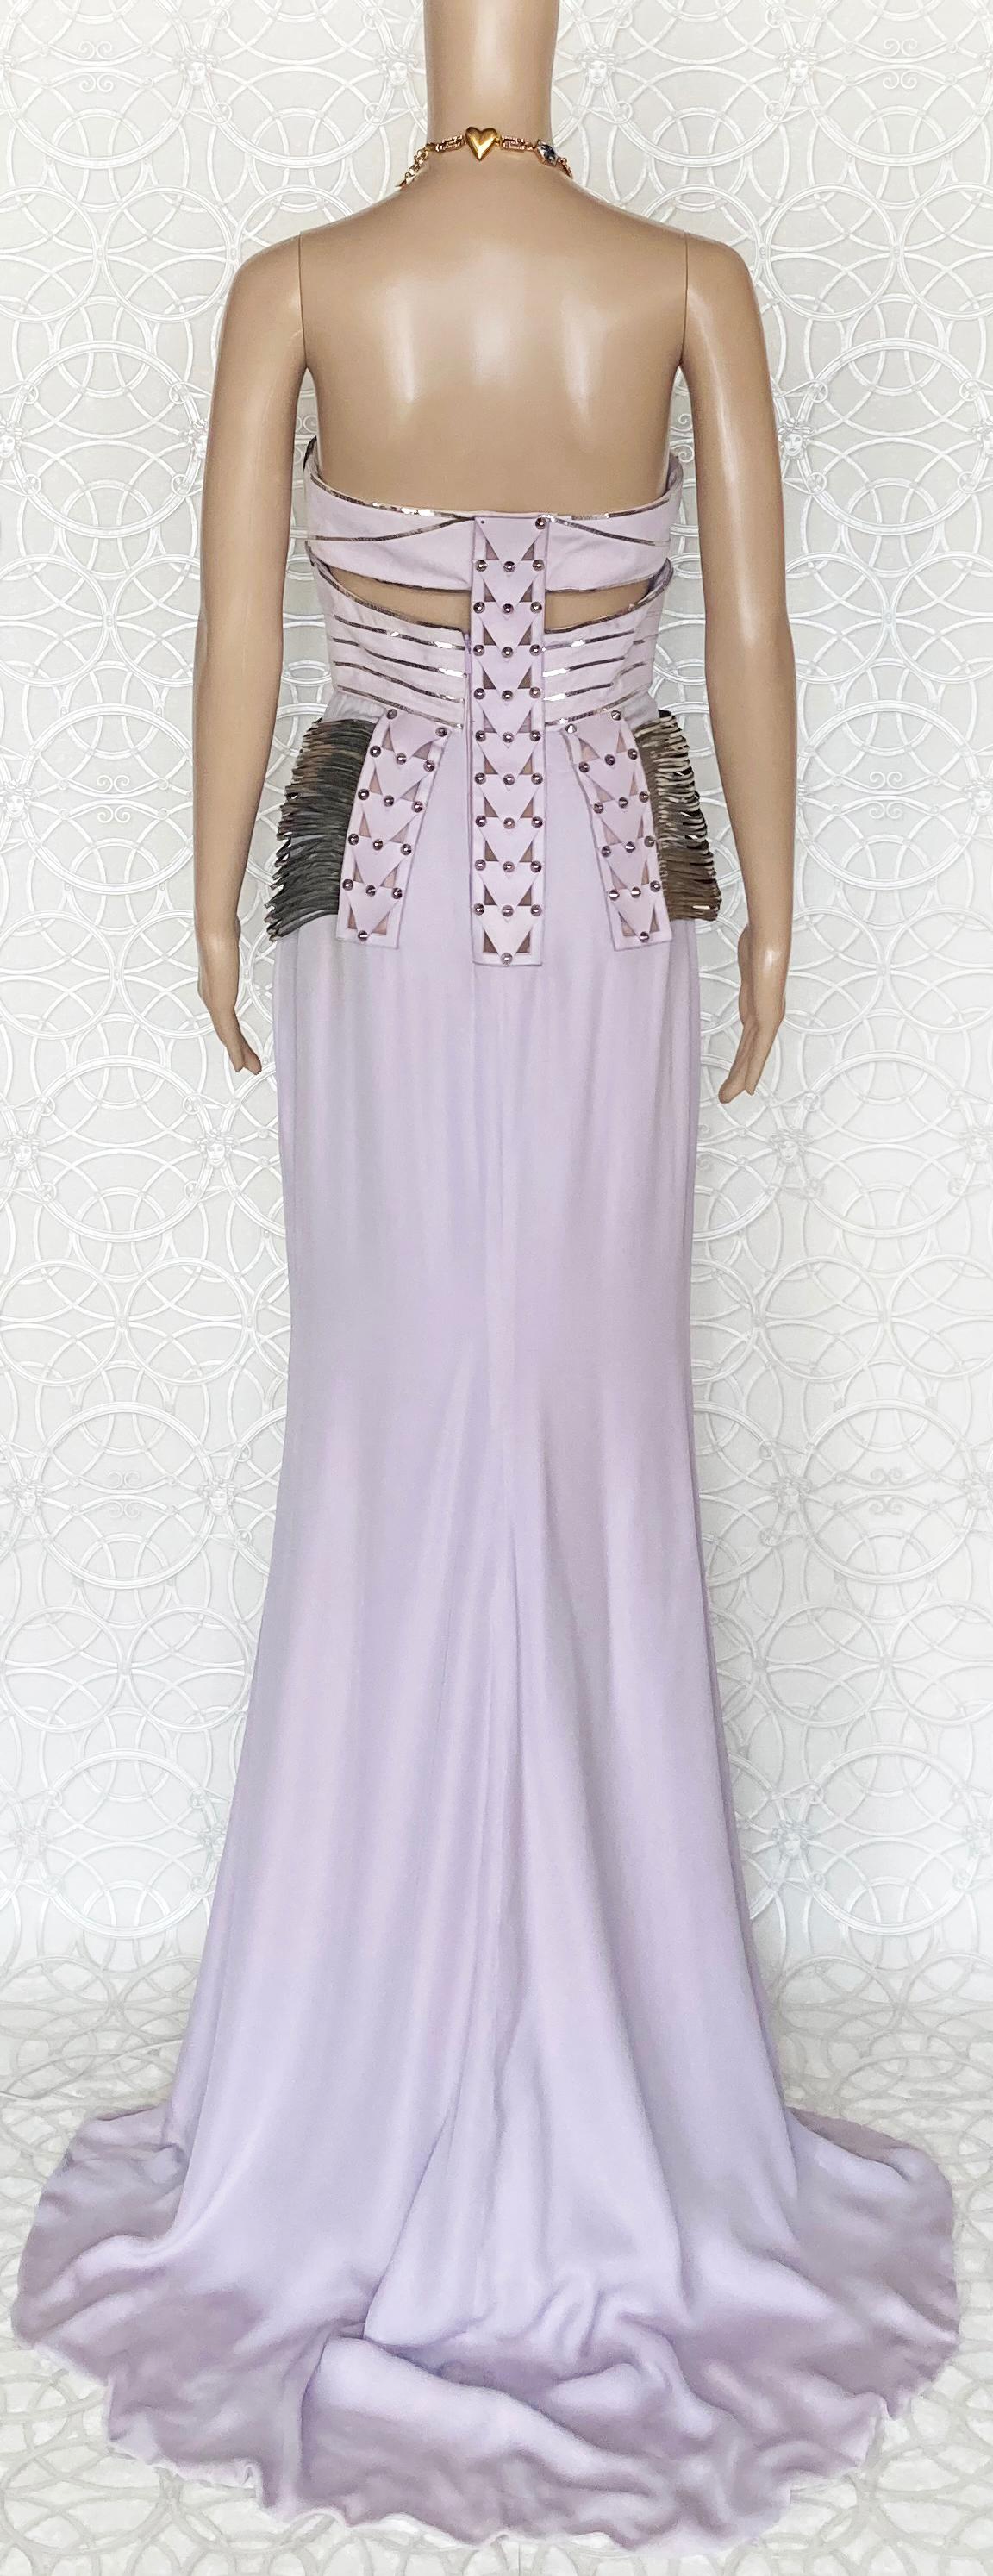 S/S 2010 L# 47 VERSACE EMBELLISHED LONG DRESS GOWN 40 - 4 as seen on DONATELLA For Sale 3